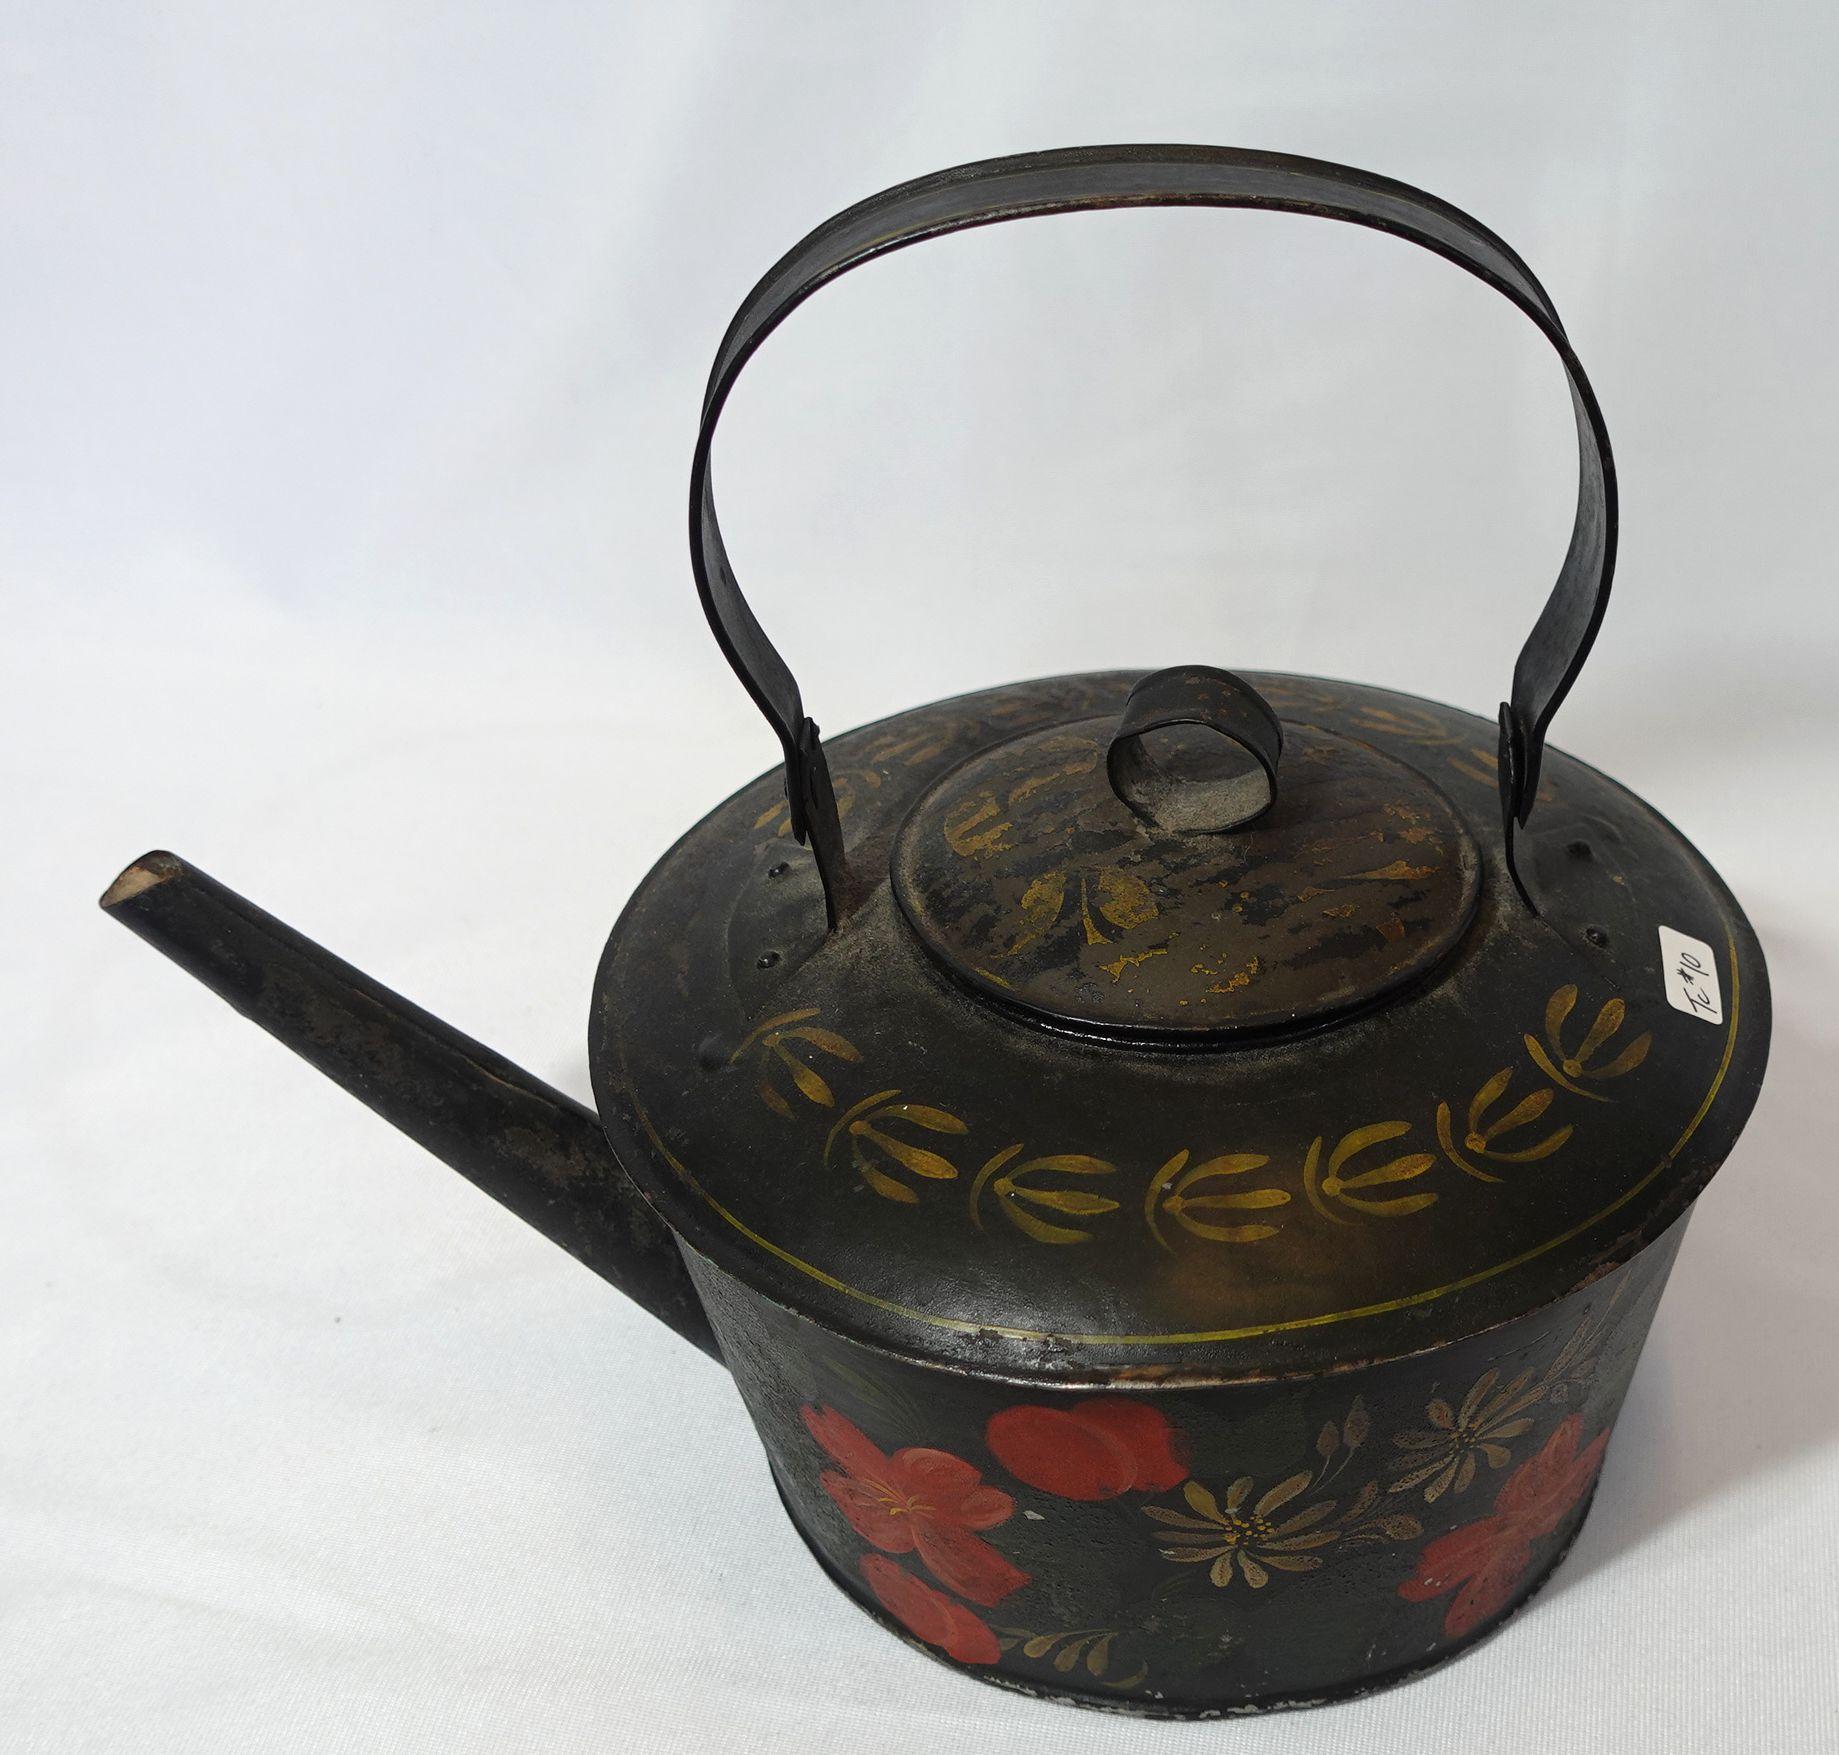 Hand-hammered painted metal tea kettle in the English Farm House Style depicting the flower patterns made in English style from the early 20th century, very well hand-made with delicate craftsmanship, and highly collectible antique.
